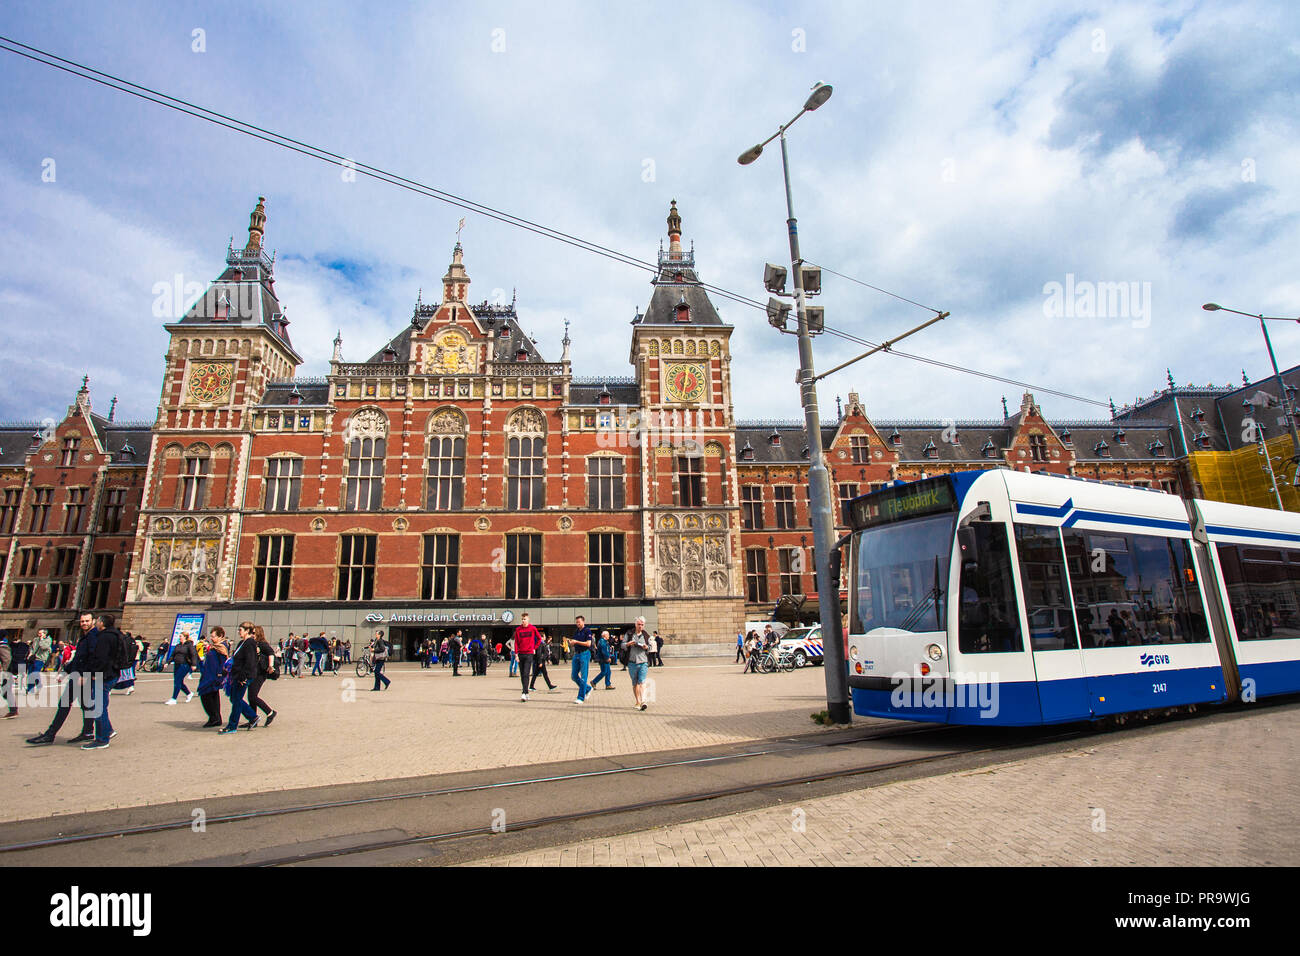 AMSTERDAM, NETHERLANDS - AUGUST 31, 2018: View of Central Station train transportation hub in Amsterdam. Stock Photo